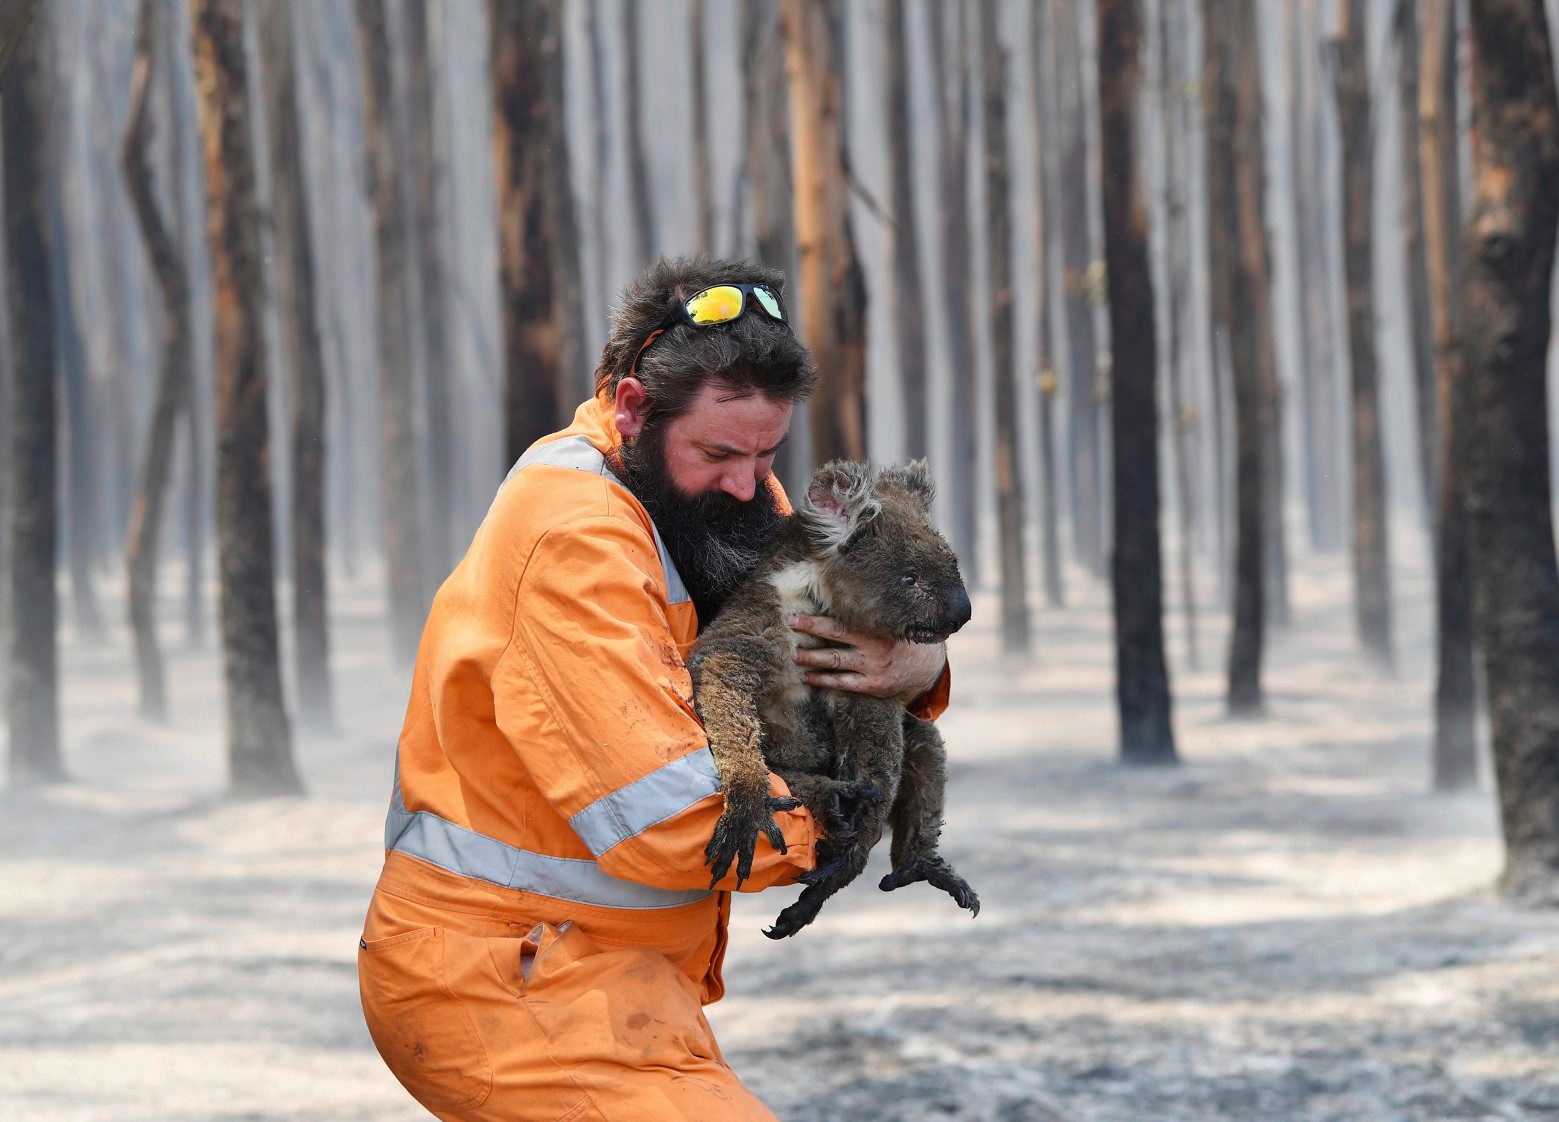 epa08109254 Adelaide wildlife rescuer Simon Adamczyk holds a koala he rescued at a burning forest near Cape Borda on Kangaroo Island, Australia, 07 January 2020. A convoy of Army vehicles, transporting up to 100 Army Reservists and self-sustainment supplies, is on Kangaroo Island as part of Operation Bushfire Assist at the request of the South Australian Government.  EPA/DAVID MARIUZ AUSTRALIA AND NEW ZEALAND OUT AUSTRALIA BUSHFIRES